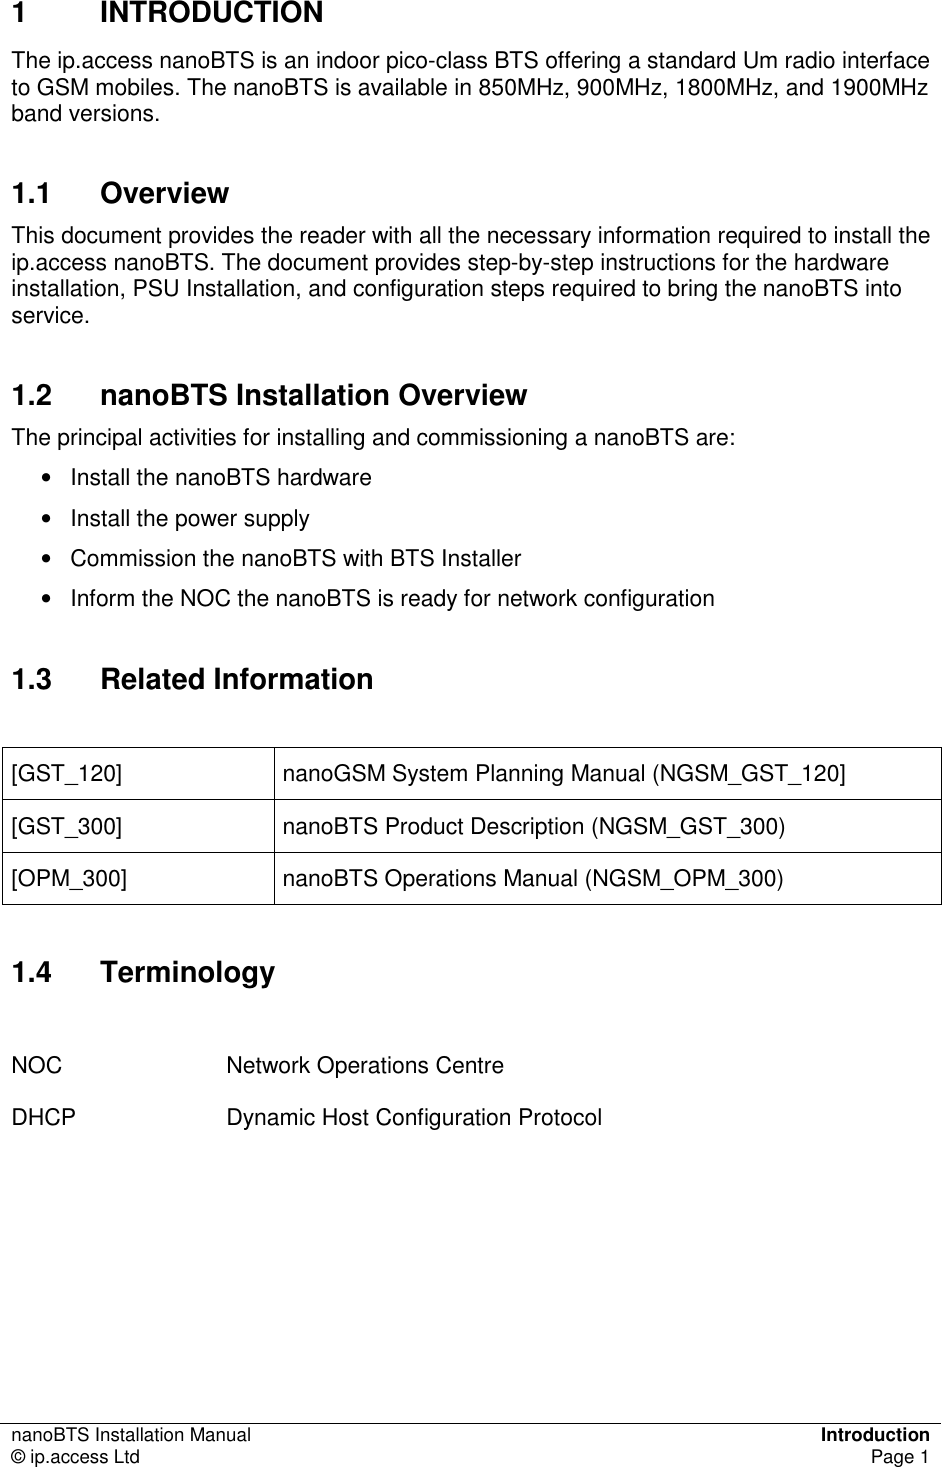 nanoBTS Installation Manual  Introduction © ip.access Ltd  Page 1  1  INTRODUCTION The ip.access nanoBTS is an indoor pico-class BTS offering a standard Um radio interface to GSM mobiles. The nanoBTS is available in 850MHz, 900MHz, 1800MHz, and 1900MHz band versions. 1.1  Overview This document provides the reader with all the necessary information required to install the ip.access nanoBTS. The document provides step-by-step instructions for the hardware installation, PSU Installation, and configuration steps required to bring the nanoBTS into service. 1.2  nanoBTS Installation Overview The principal activities for installing and commissioning a nanoBTS are: •  Install the nanoBTS hardware •  Install the power supply •  Commission the nanoBTS with BTS Installer •  Inform the NOC the nanoBTS is ready for network configuration 1.3  Related Information  [GST_120]  nanoGSM System Planning Manual (NGSM_GST_120] [GST_300]  nanoBTS Product Description (NGSM_GST_300) [OPM_300]  nanoBTS Operations Manual (NGSM_OPM_300) 1.4  Terminology  NOC  Network Operations Centre DHCP  Dynamic Host Configuration Protocol  